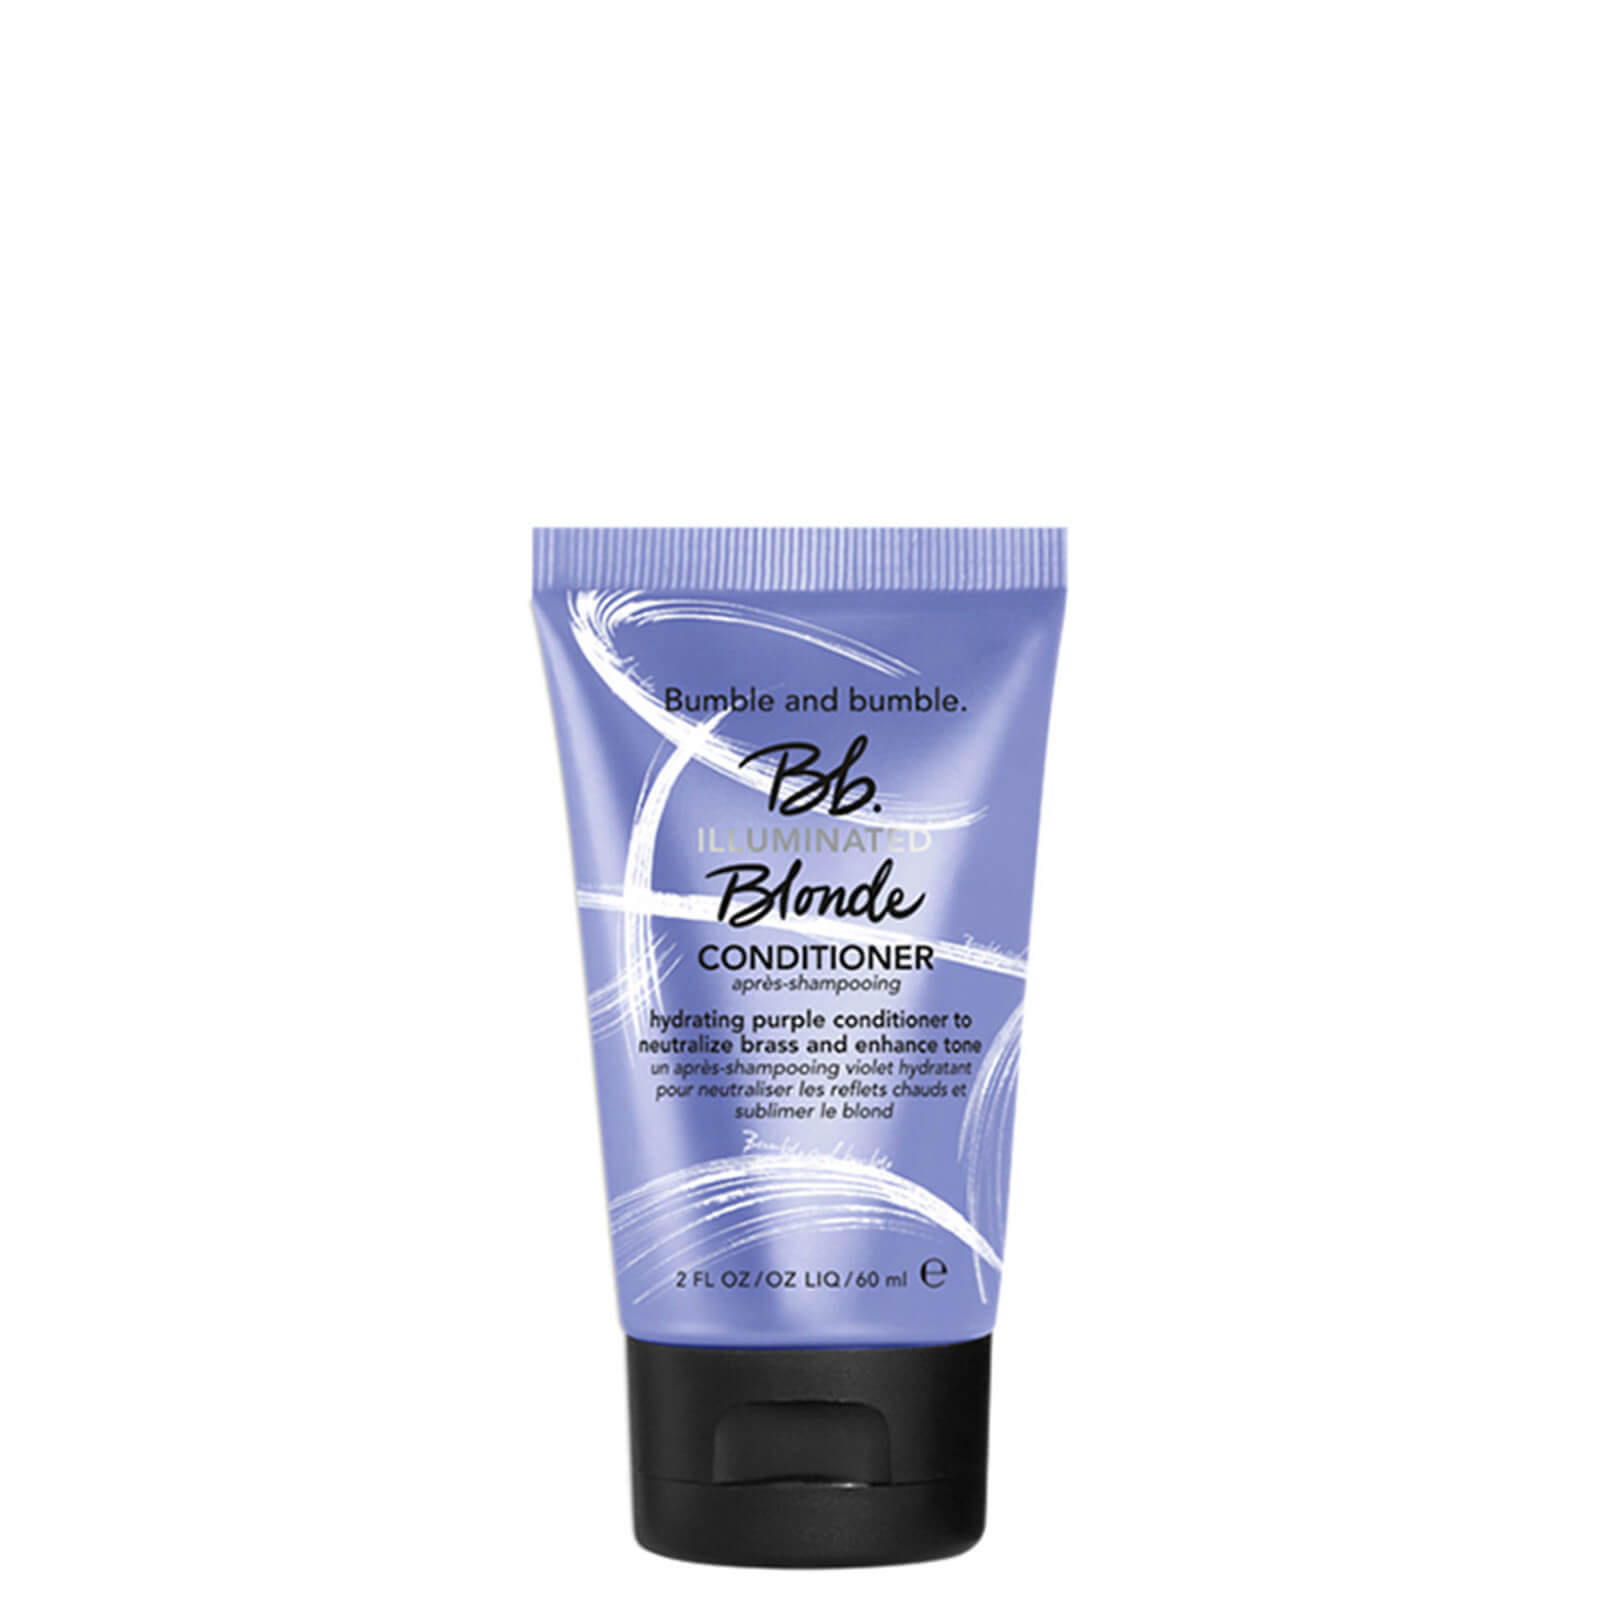 Image of Bumble and bumble Blonde Conditioner (Various Sizes) - 60ml